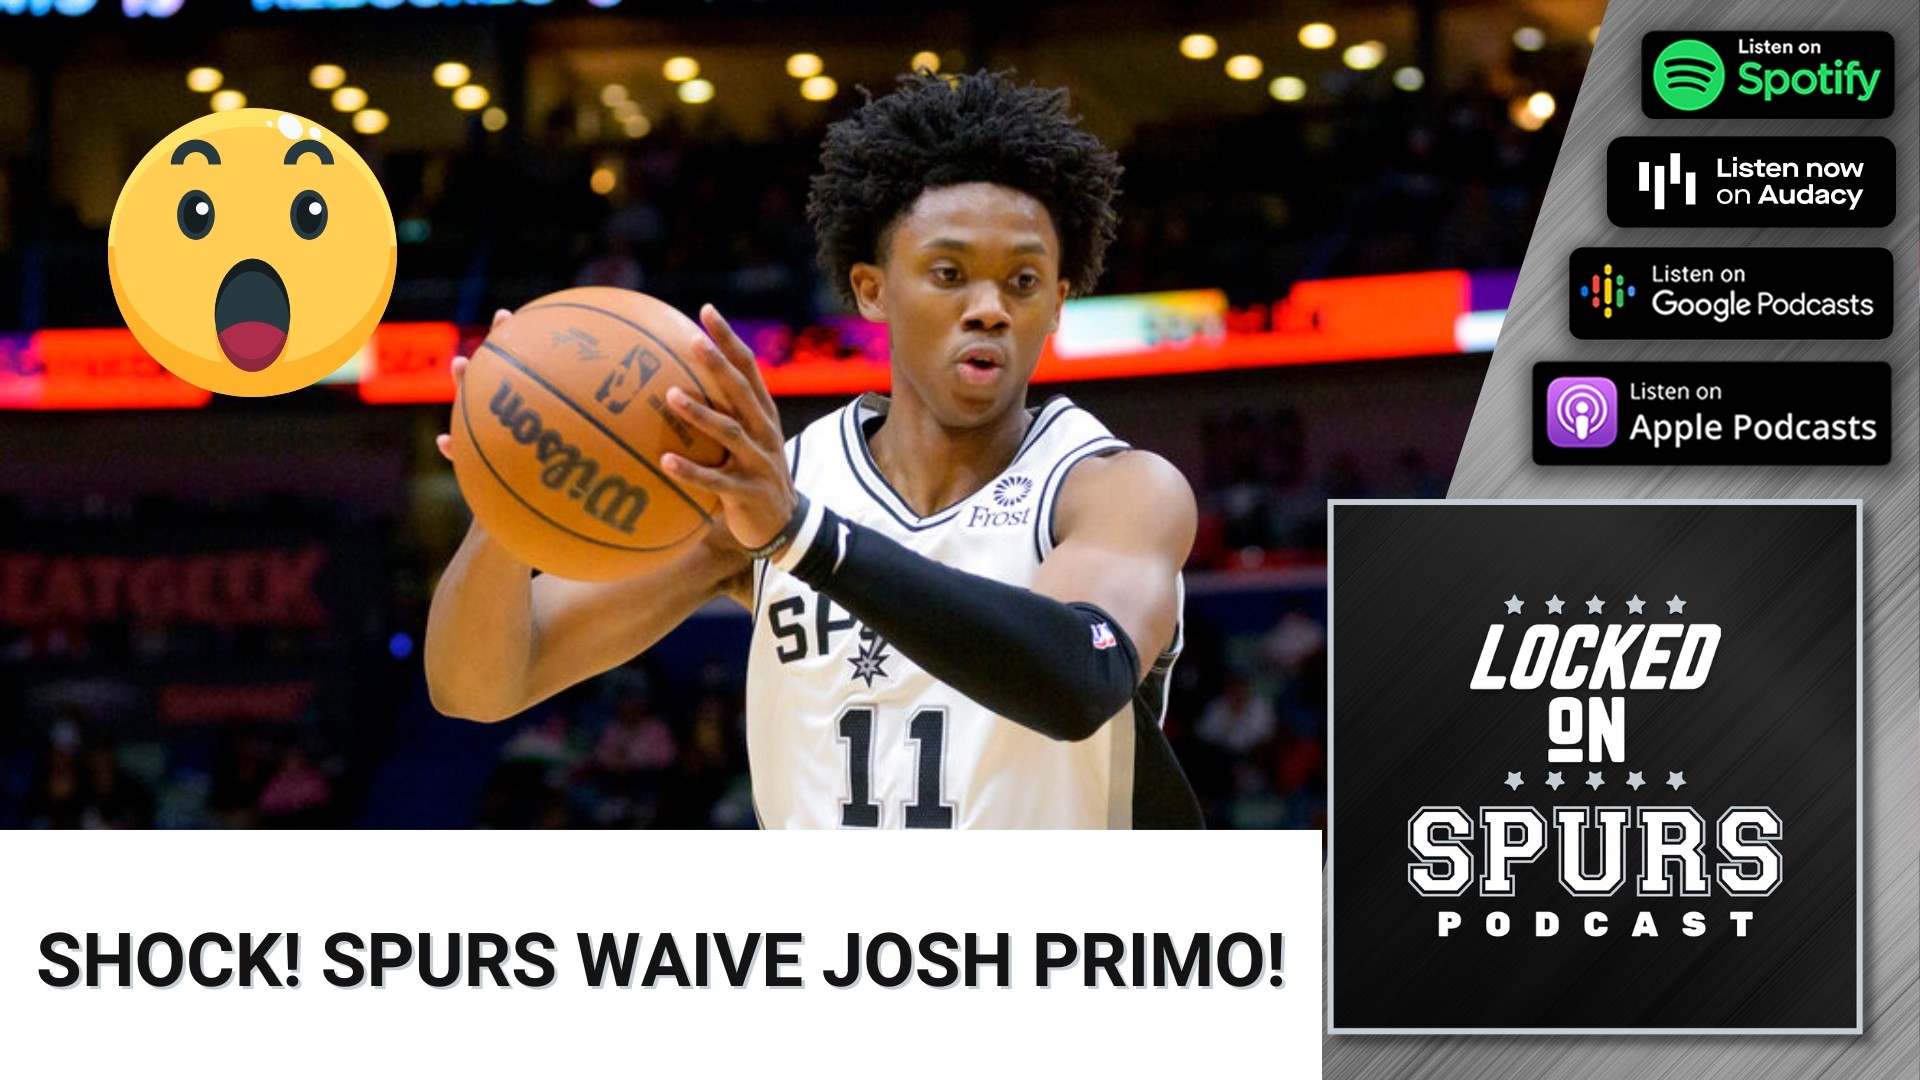 In a stunning announcement, the Spurs waive Joshua Primo.